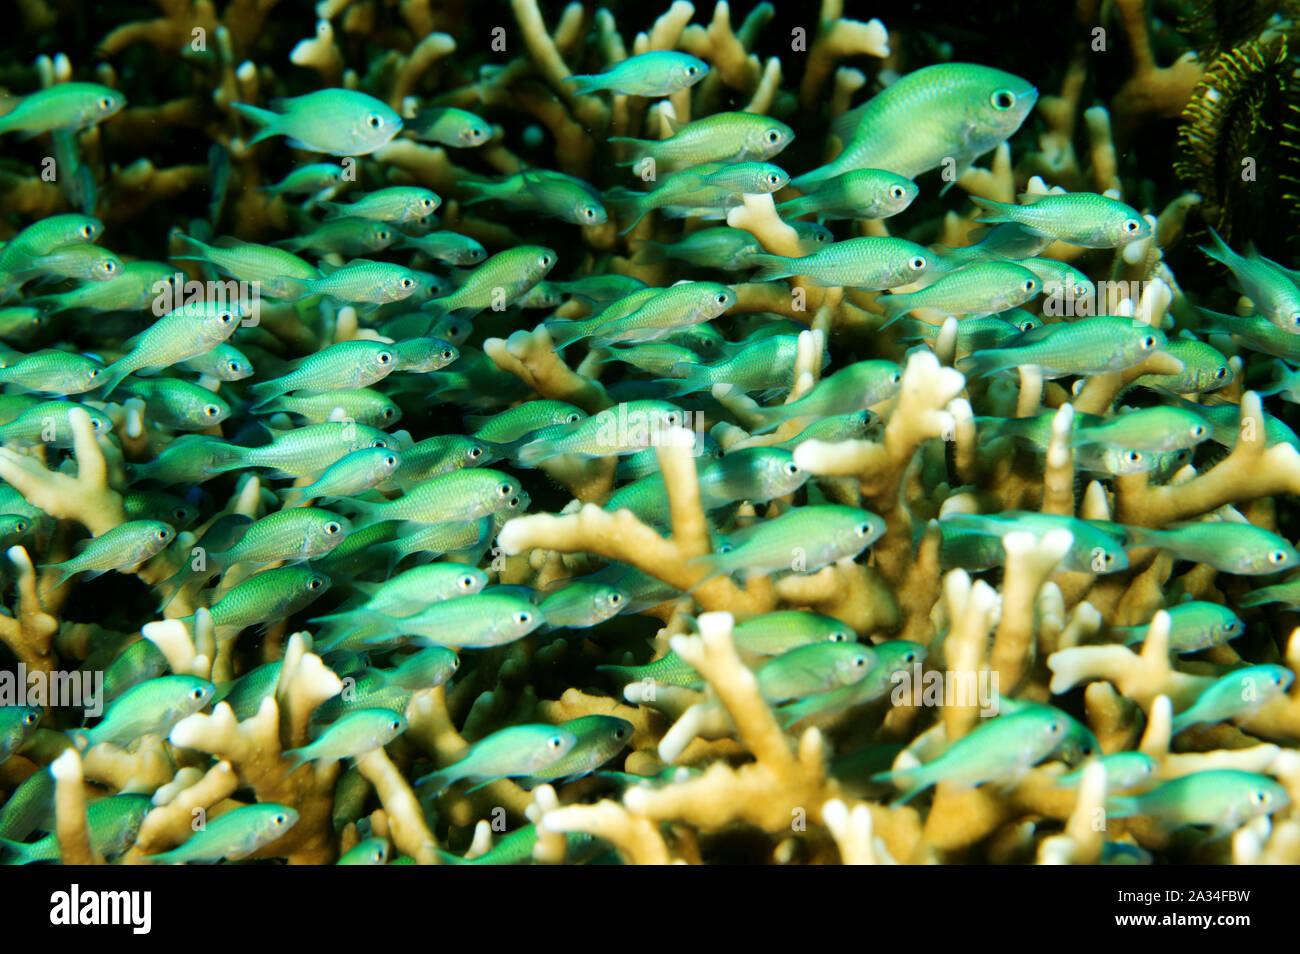 Juvenile Blue damsels, Chromis viridis,  sheltering between fire coral branches, Sulawesi Indonesia. Stock Photo